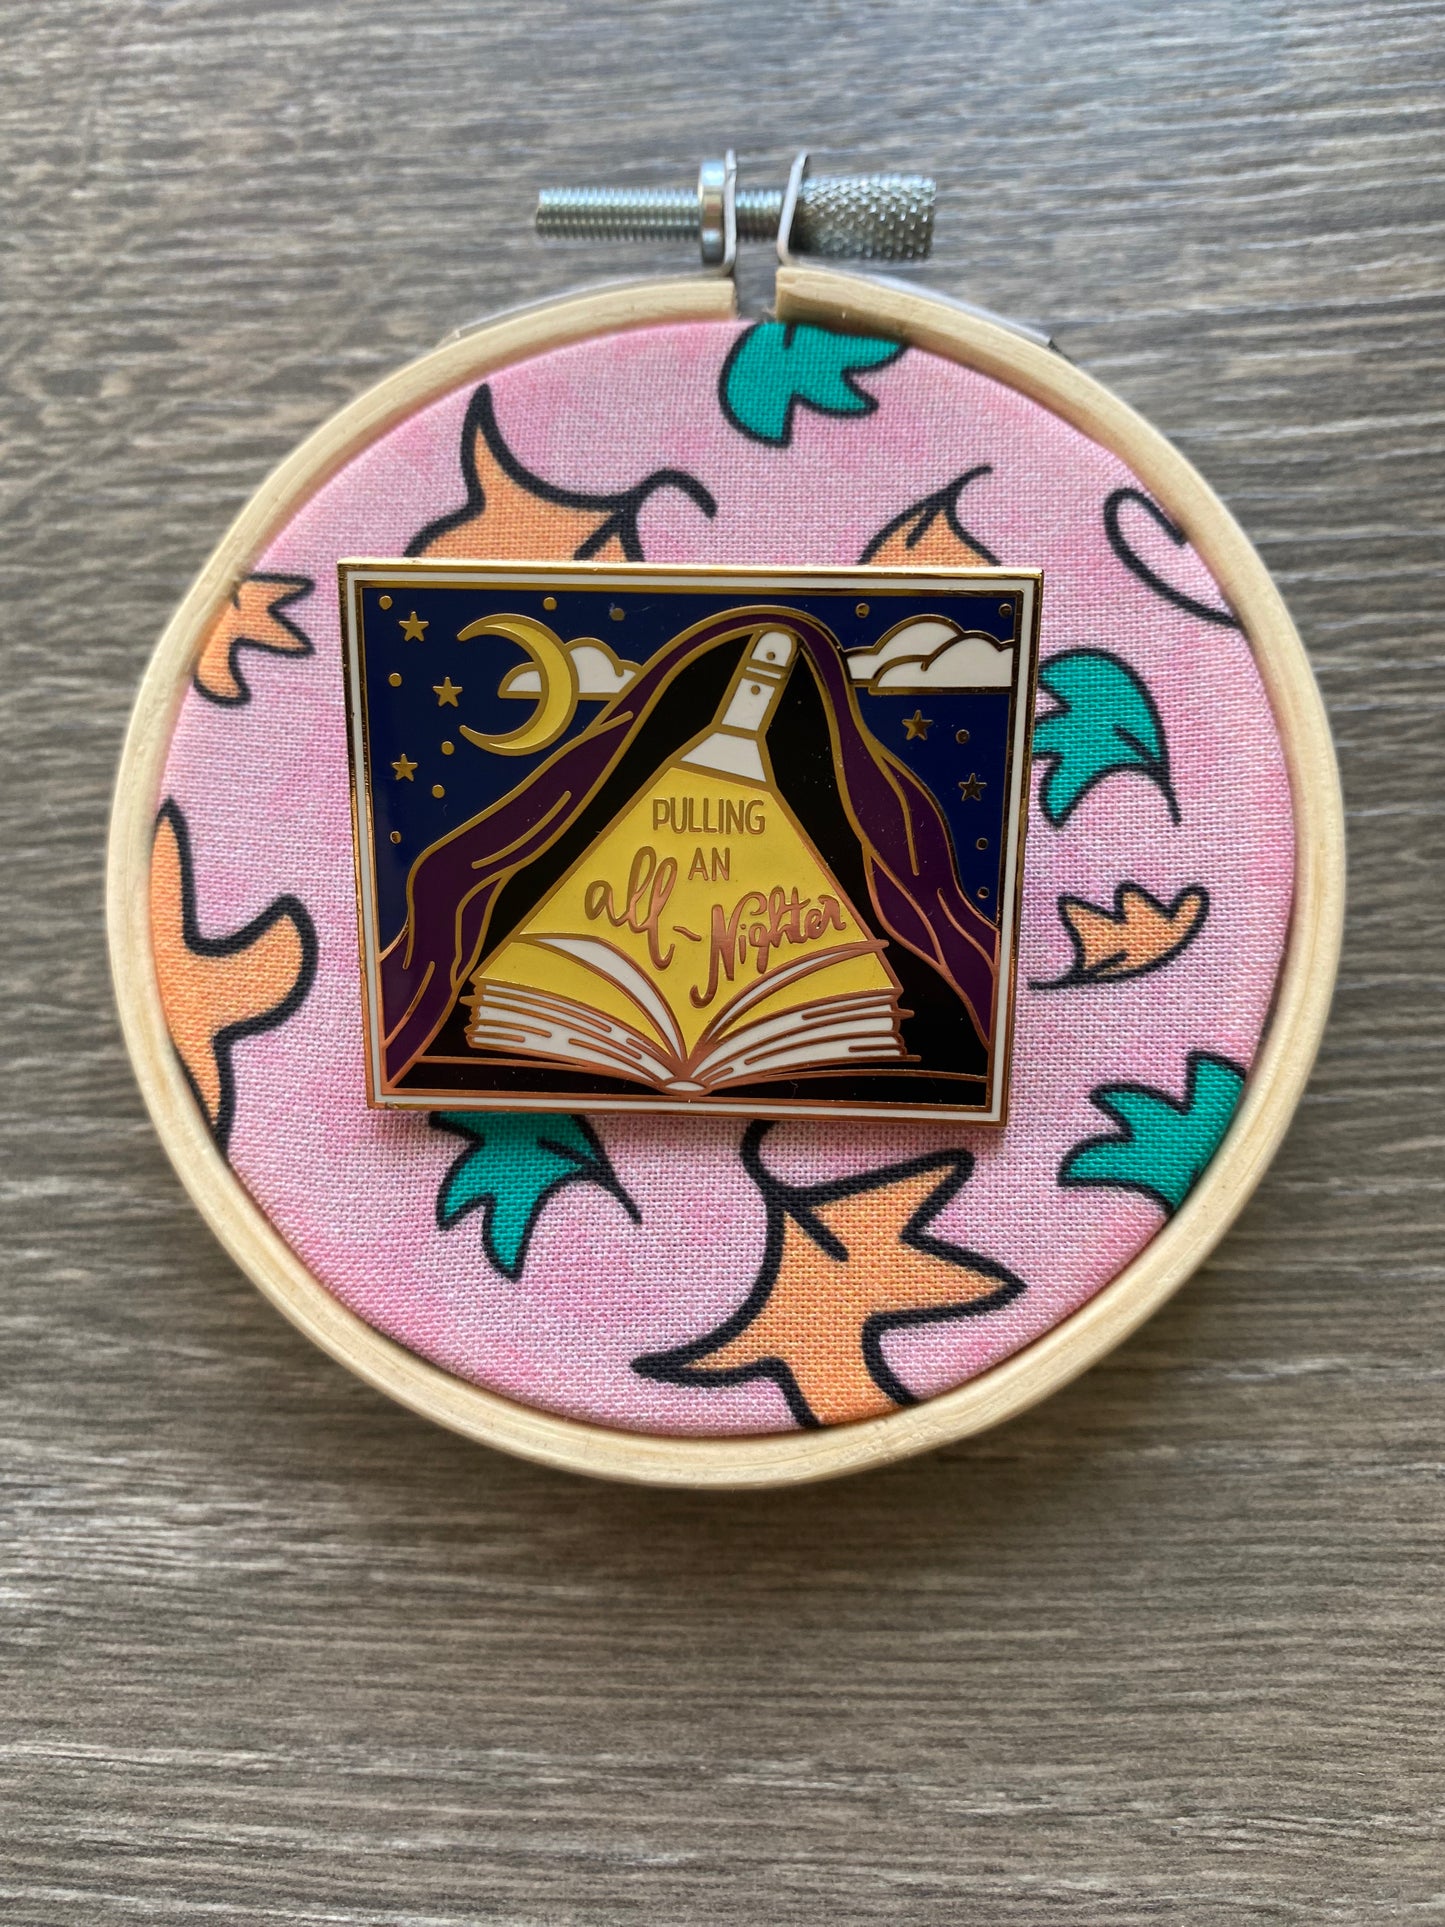 3 Inch Heartstopper Inspired Leaves Pin Hoop For Enamel Pins Pin Display Bookish Merch Reader Gifts For LGBTQ Book Lover Gift For Her